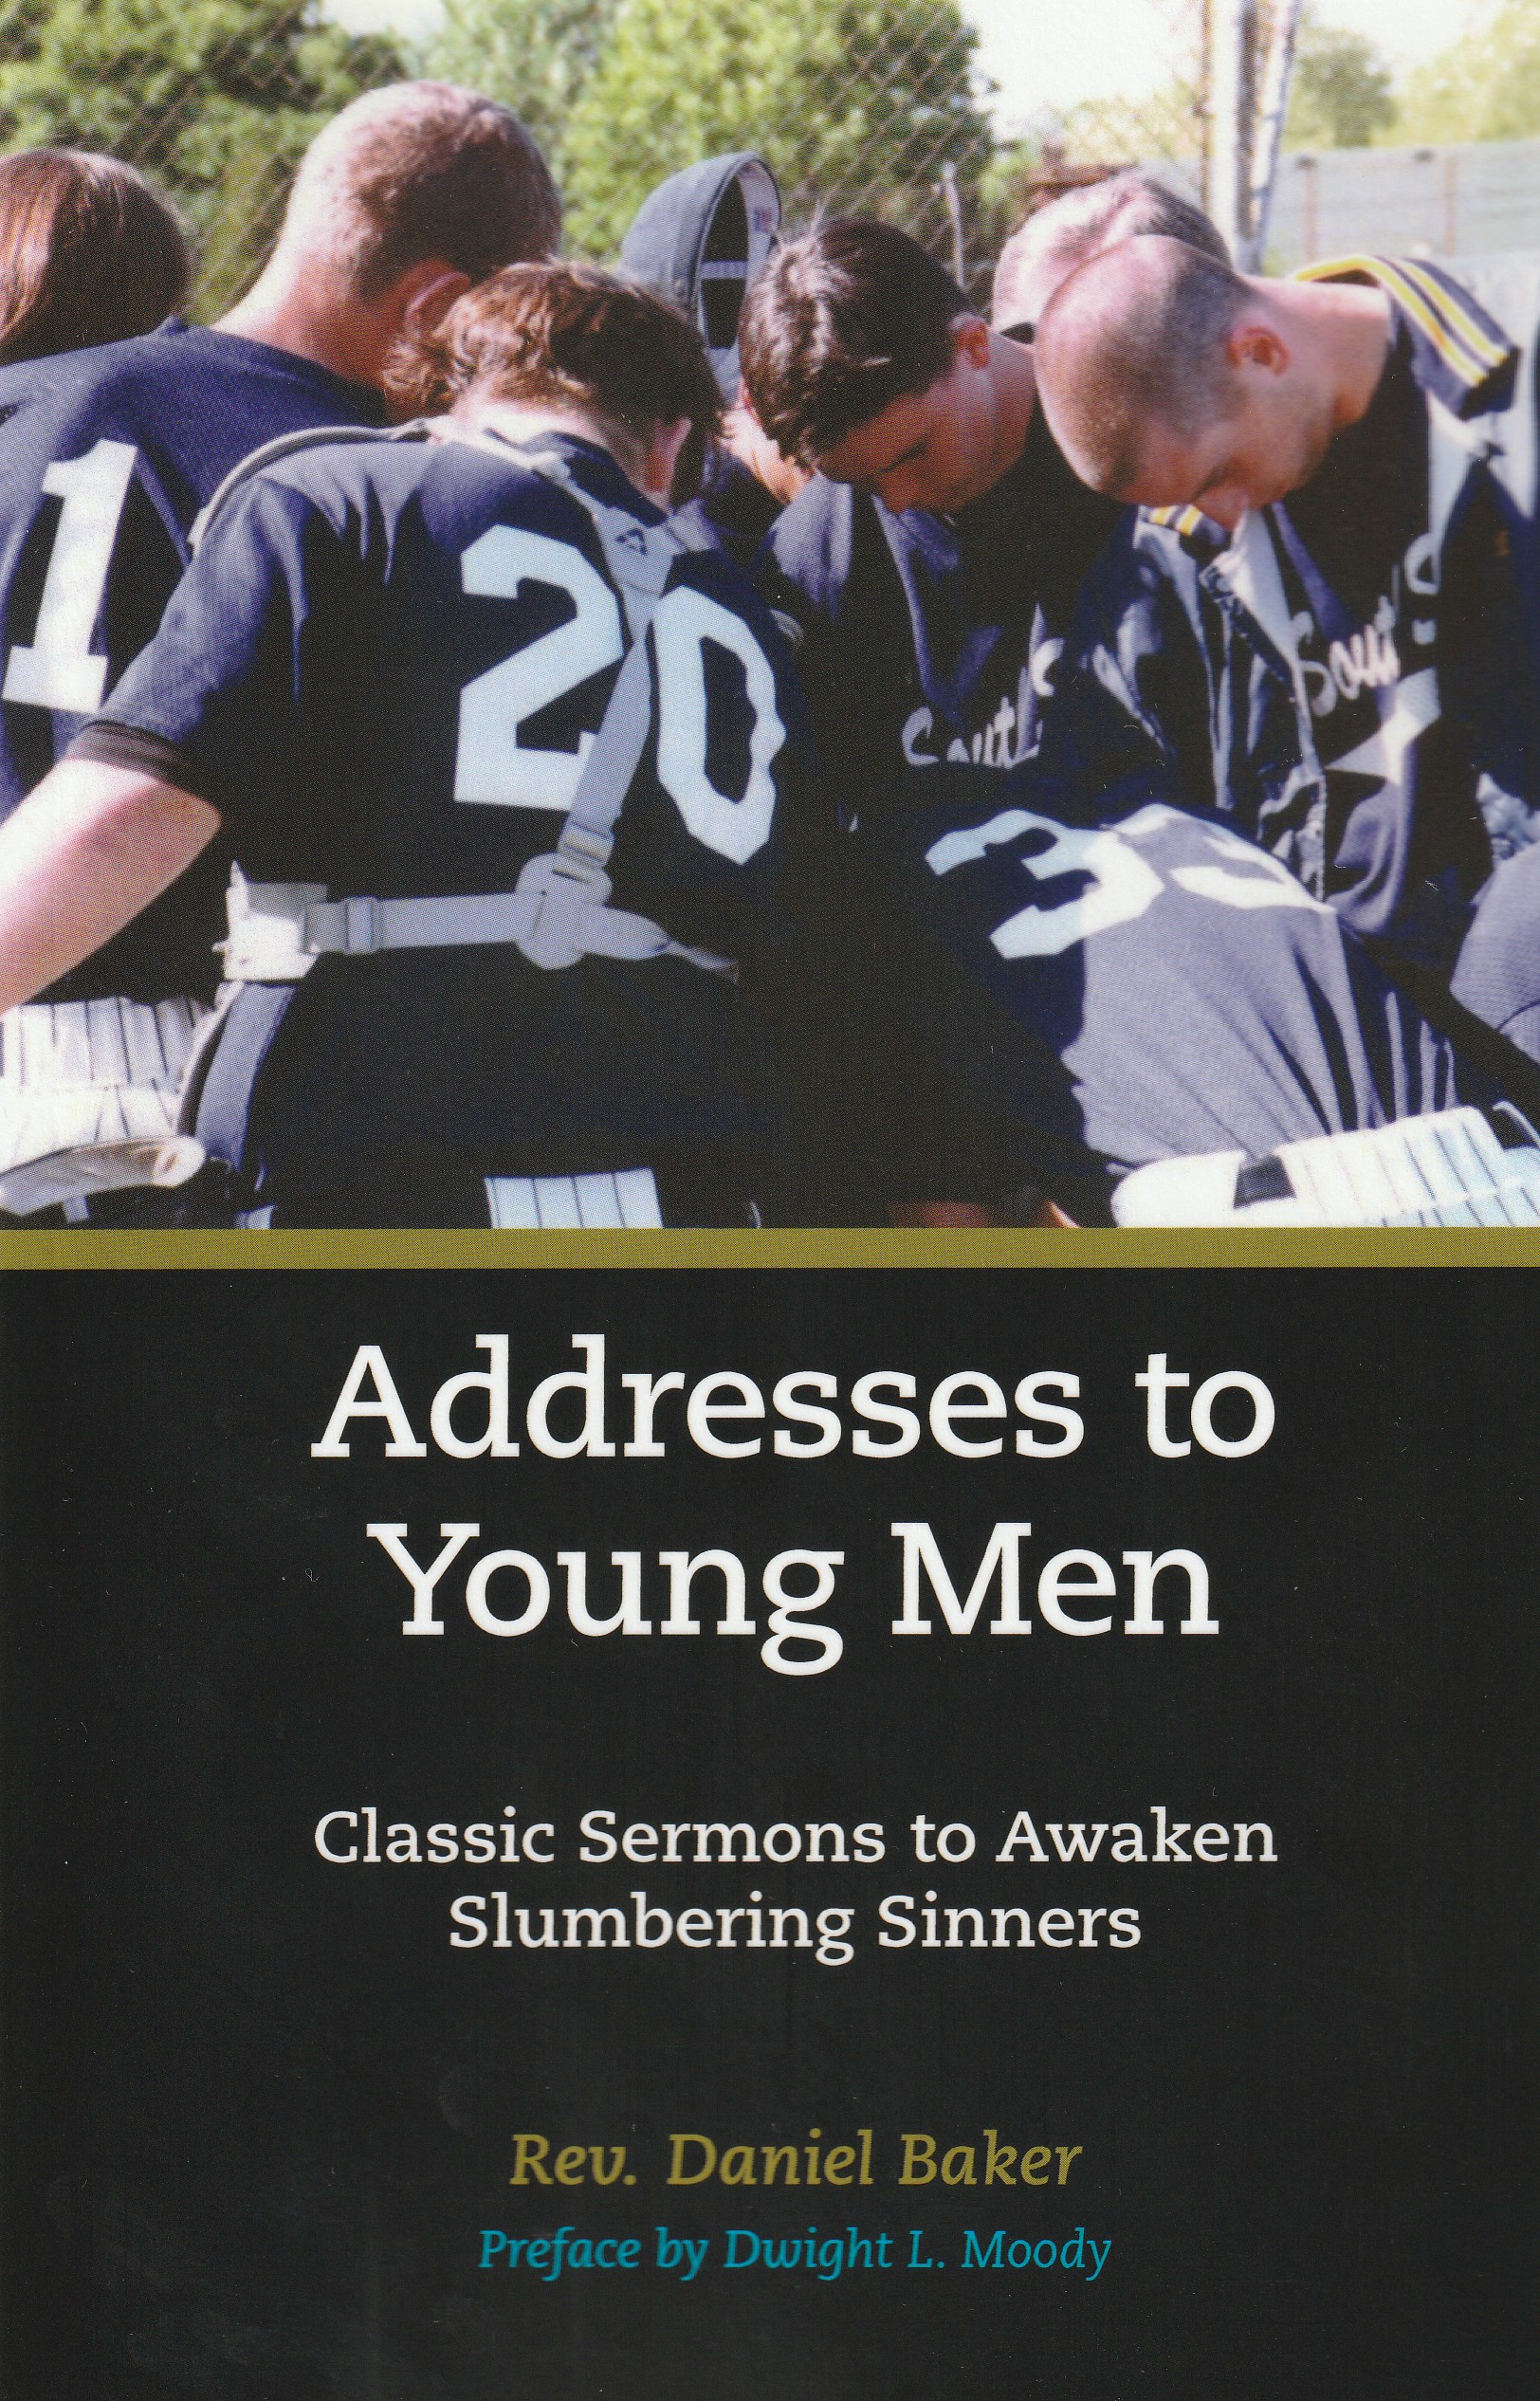 Addresses to Young Men (Baker)